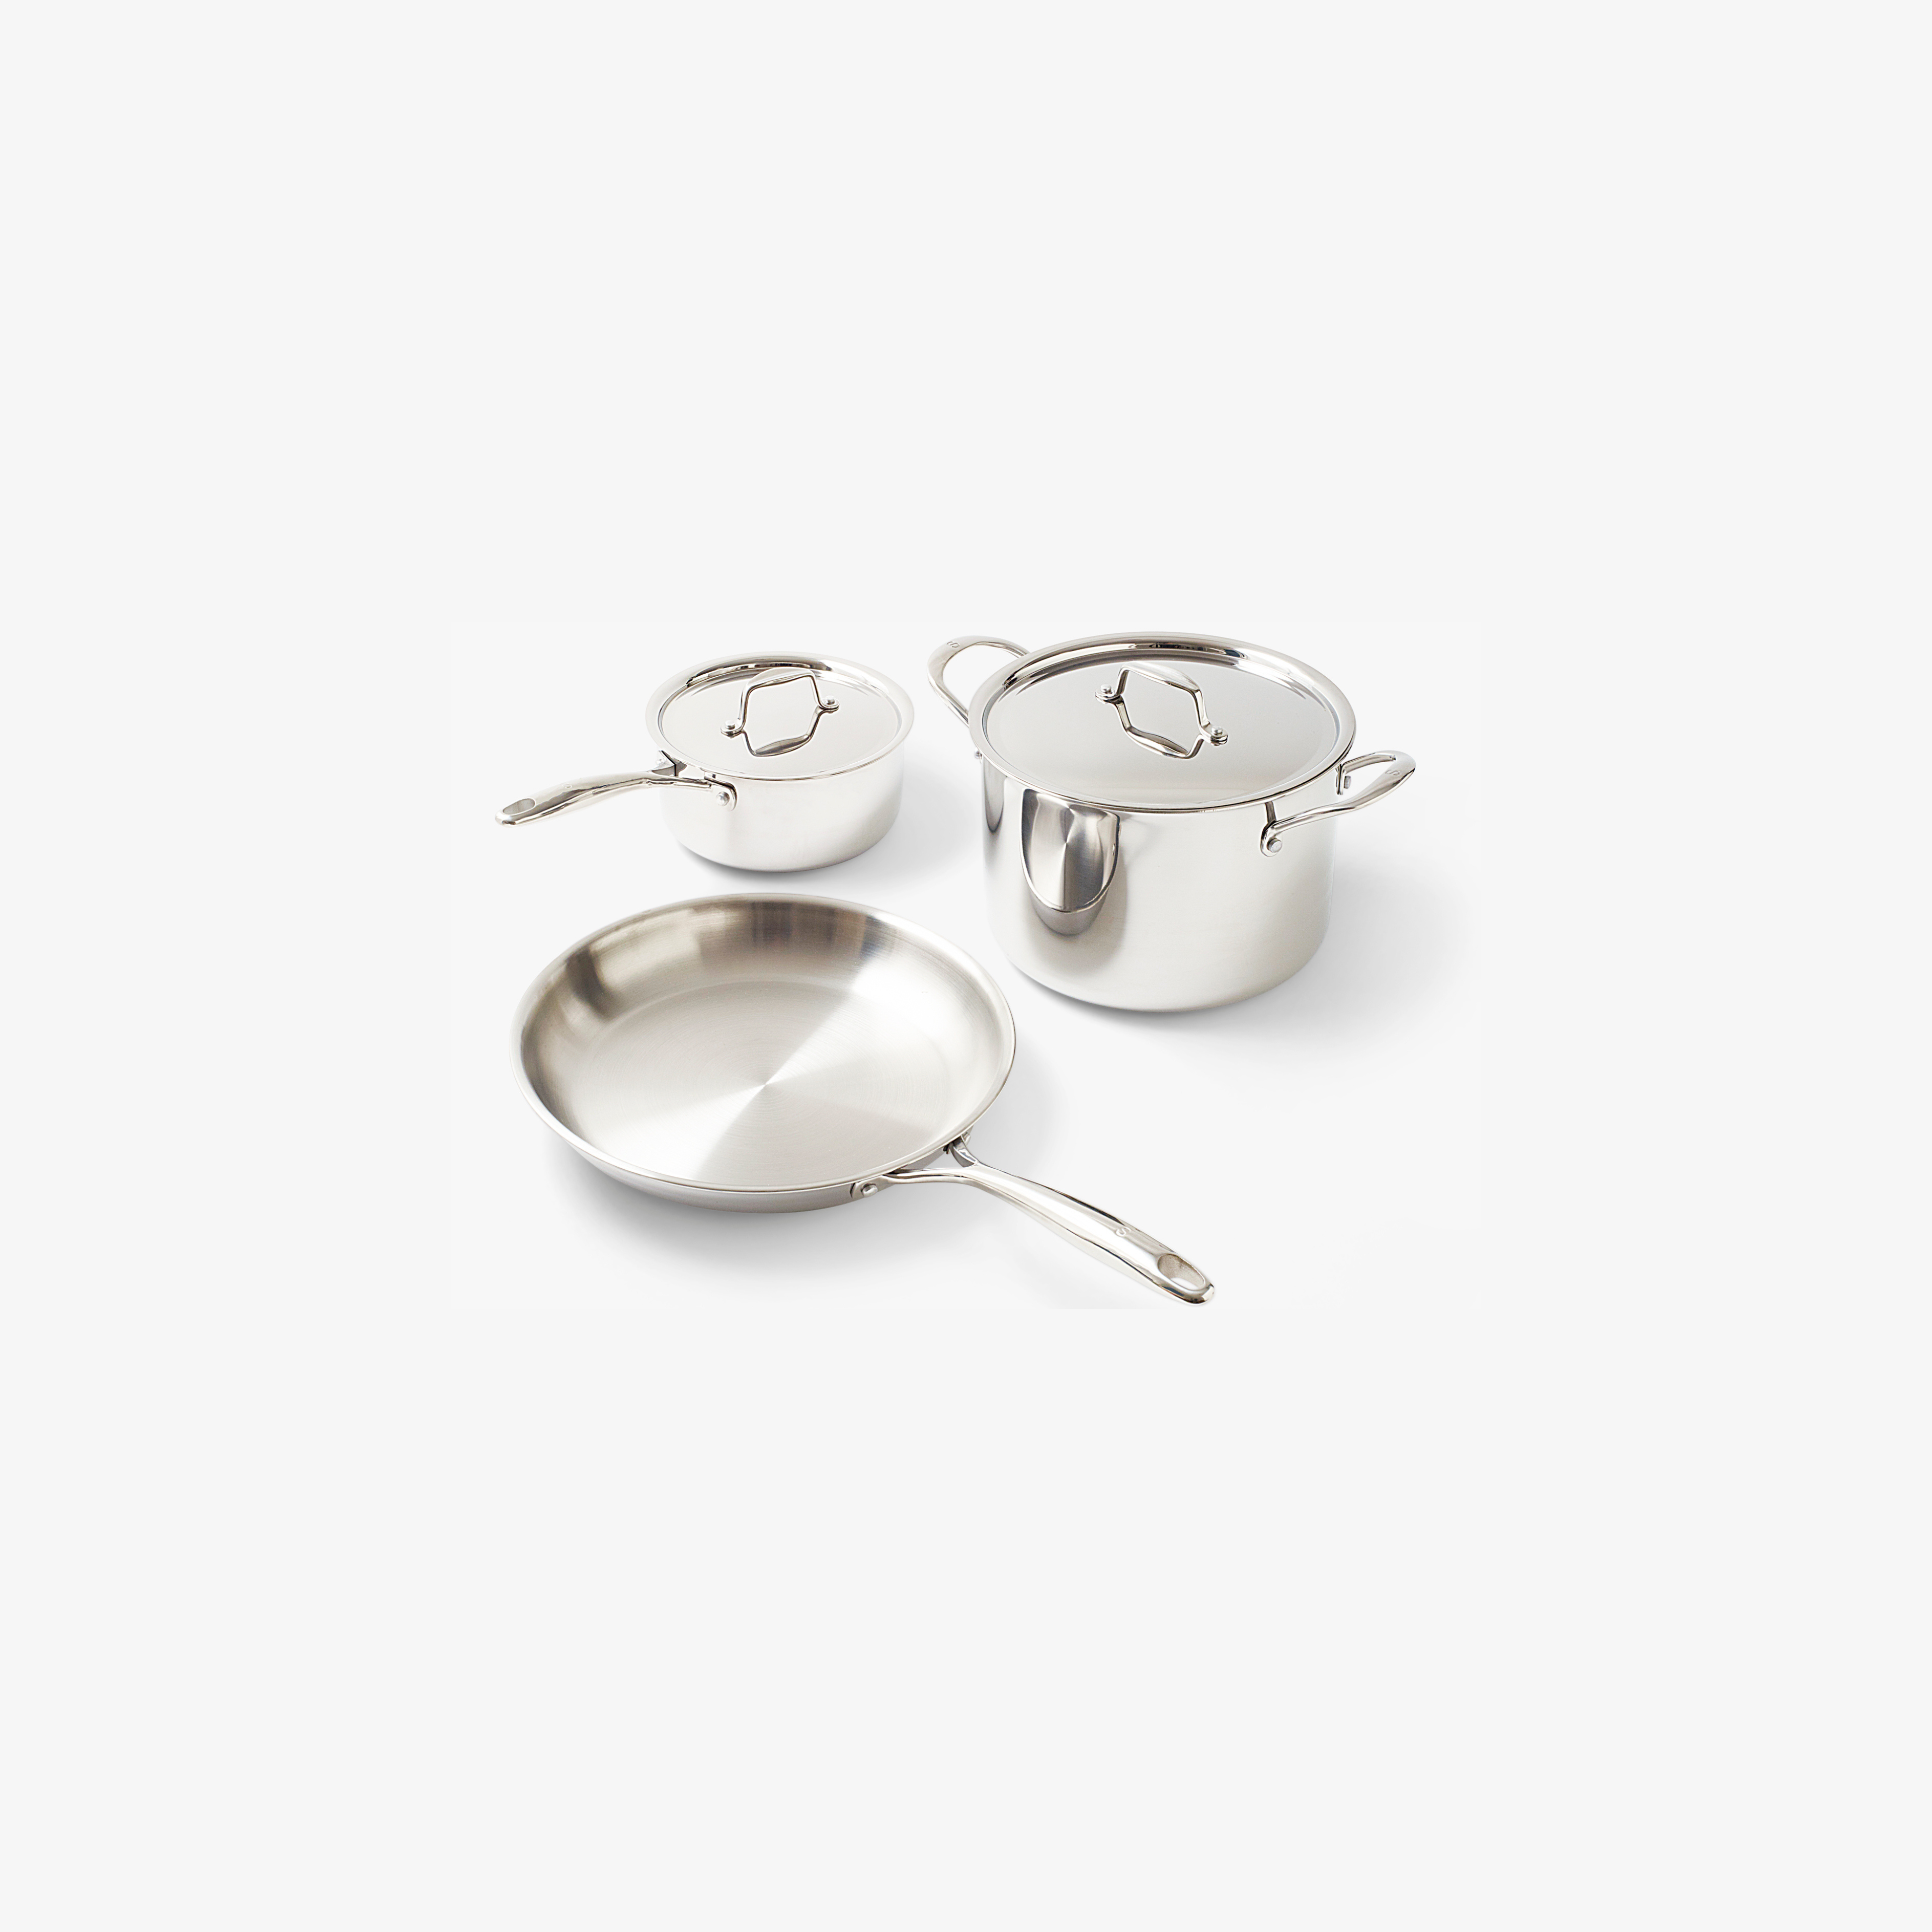 Stainless Steel Set (5-piece)